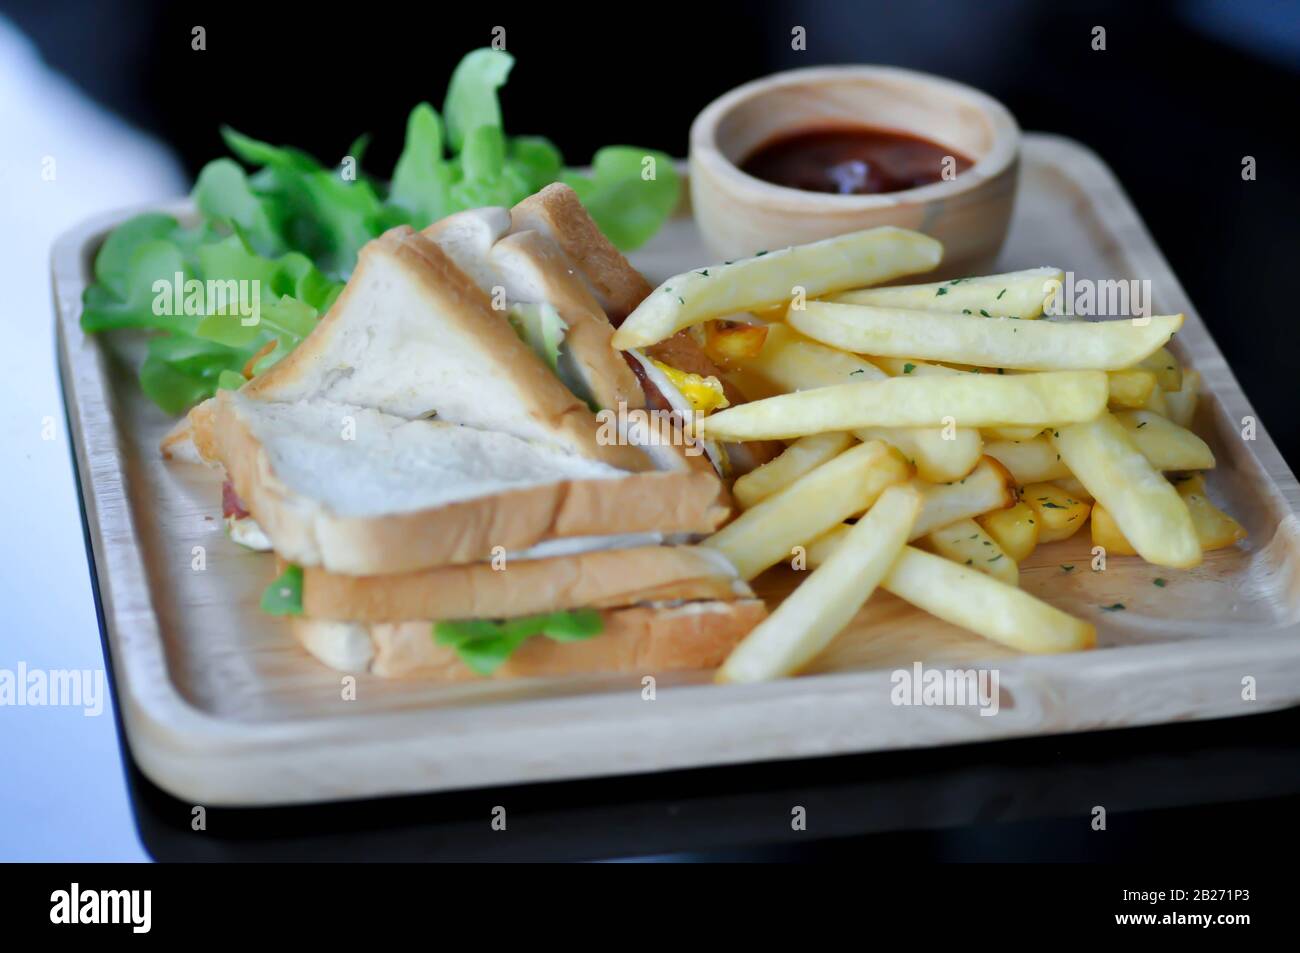 sandwich or egg sandwich and French fries Stock Photo